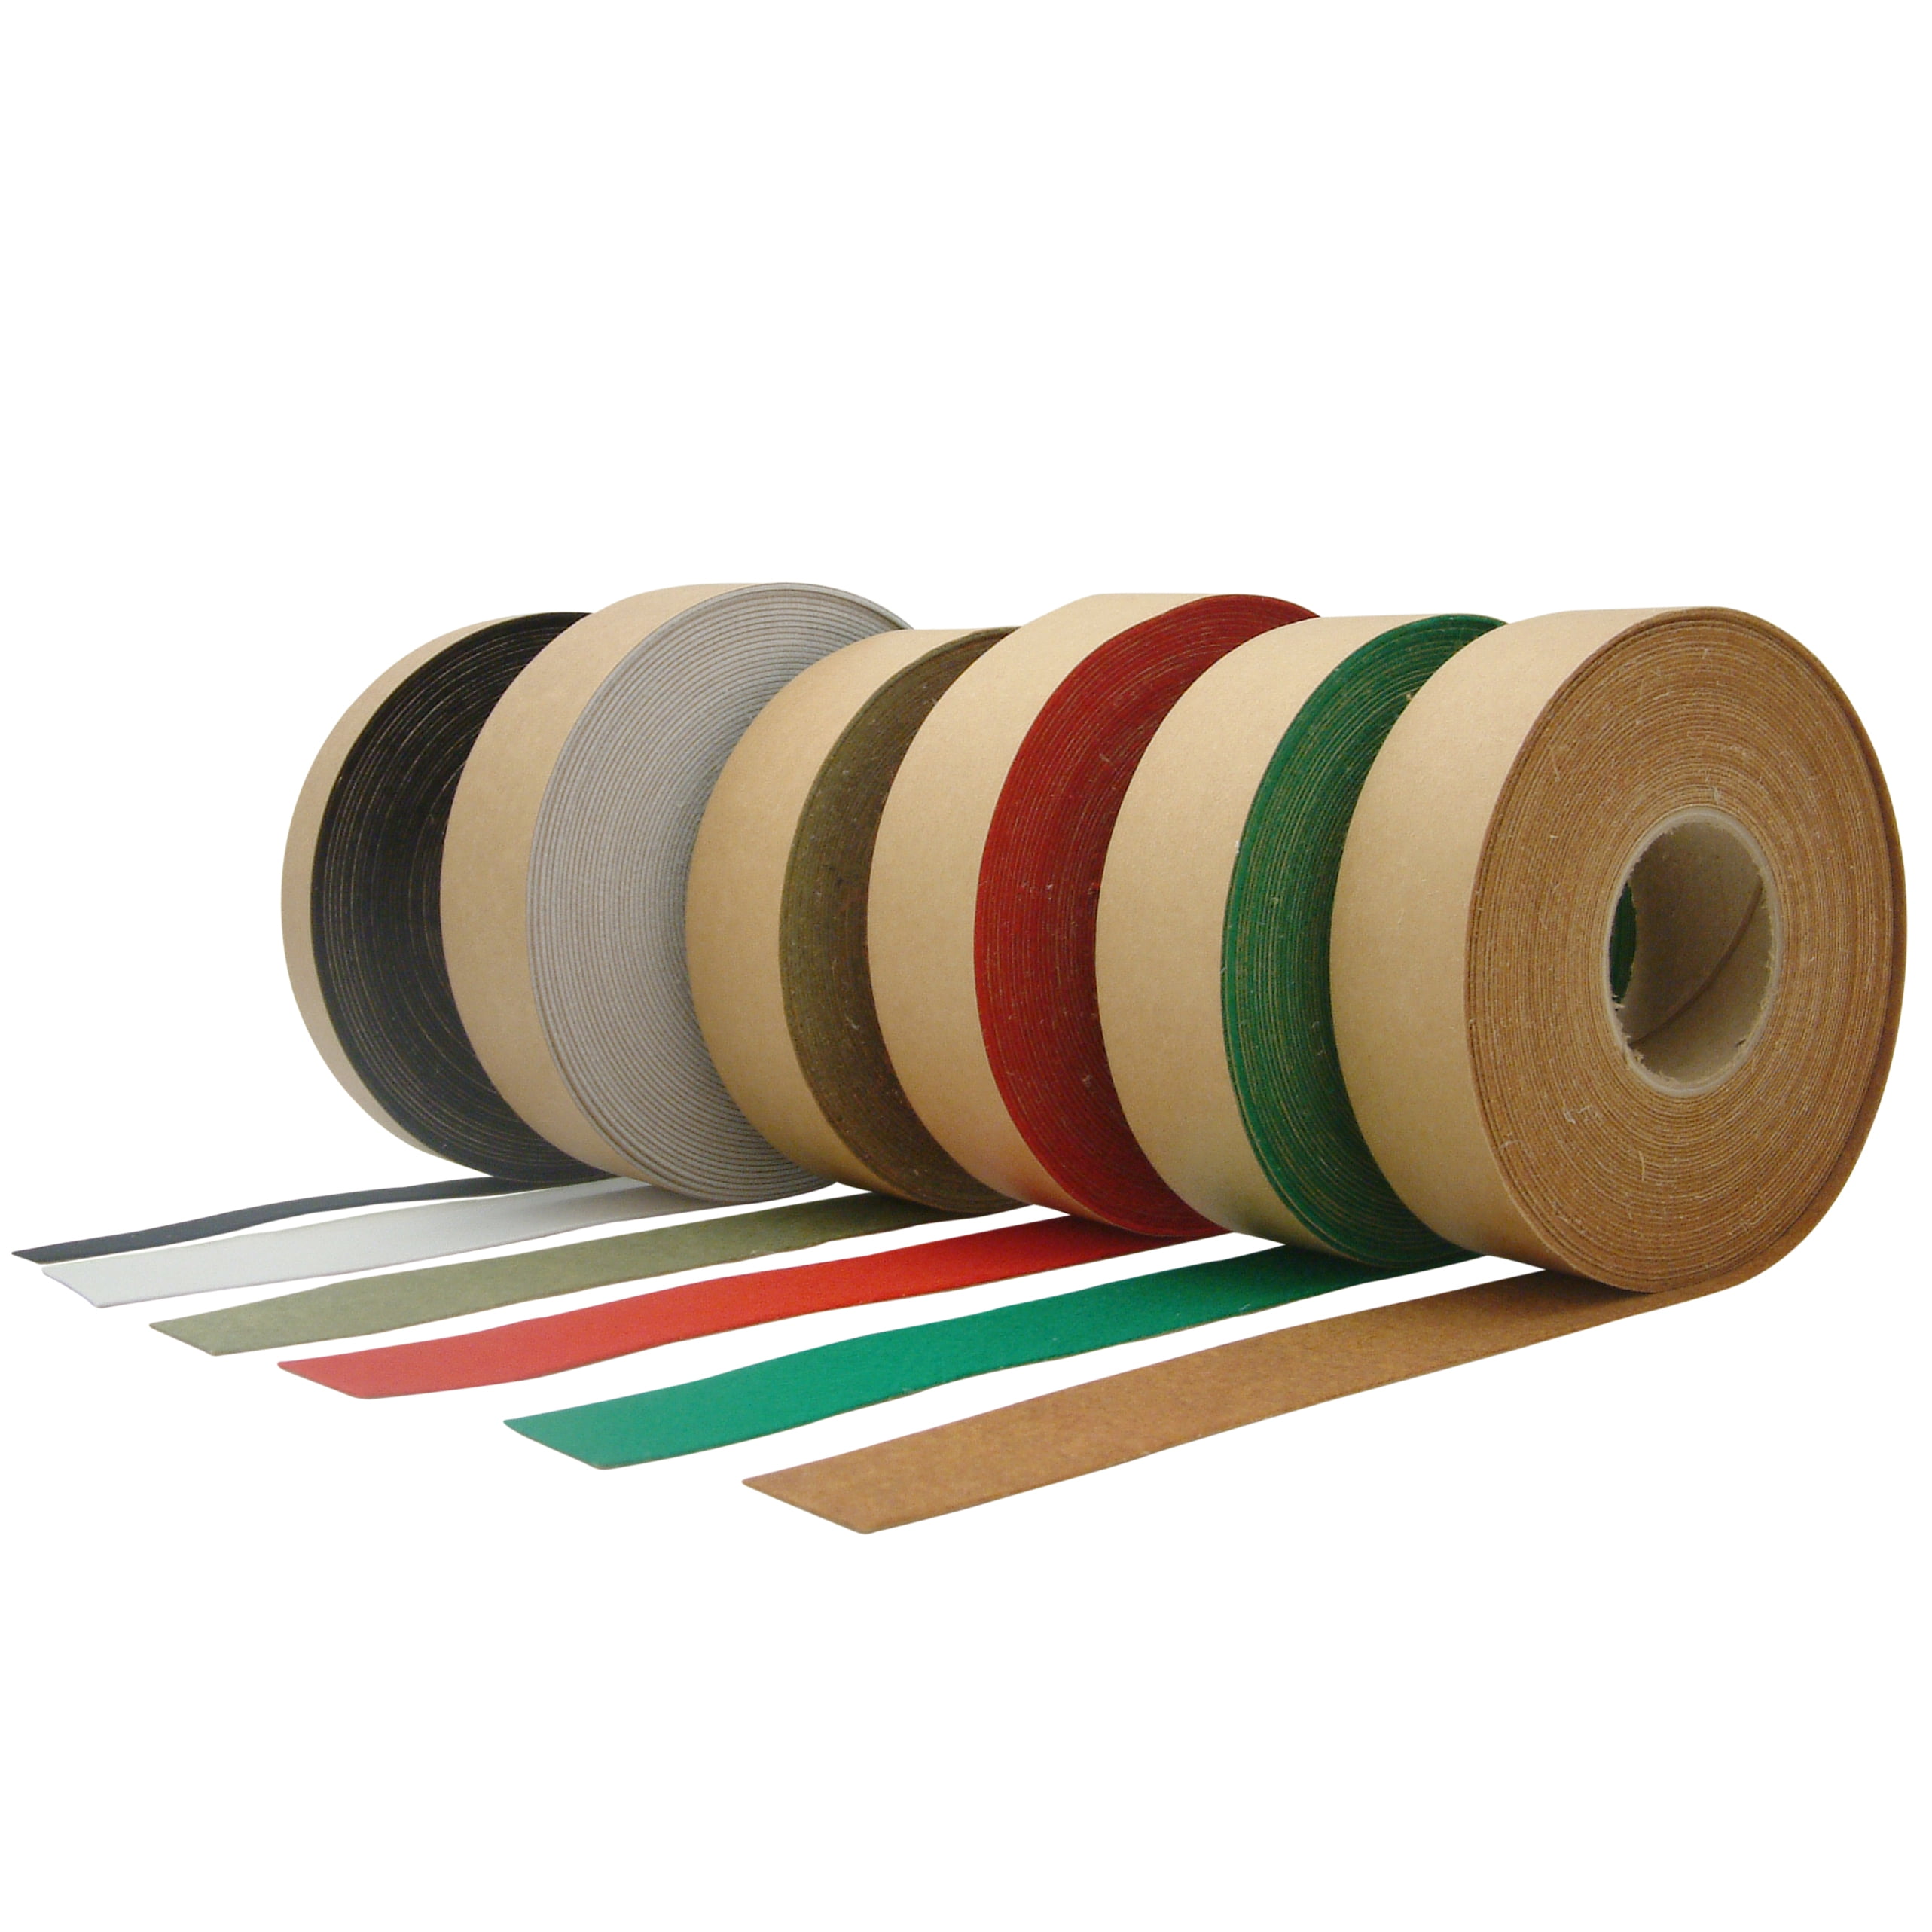 Black Felt Stripping, Adhesive Backed, 3/4 Wide x 3mm (.118”) Thick, 50'  Roll - 3 Roll Minimum